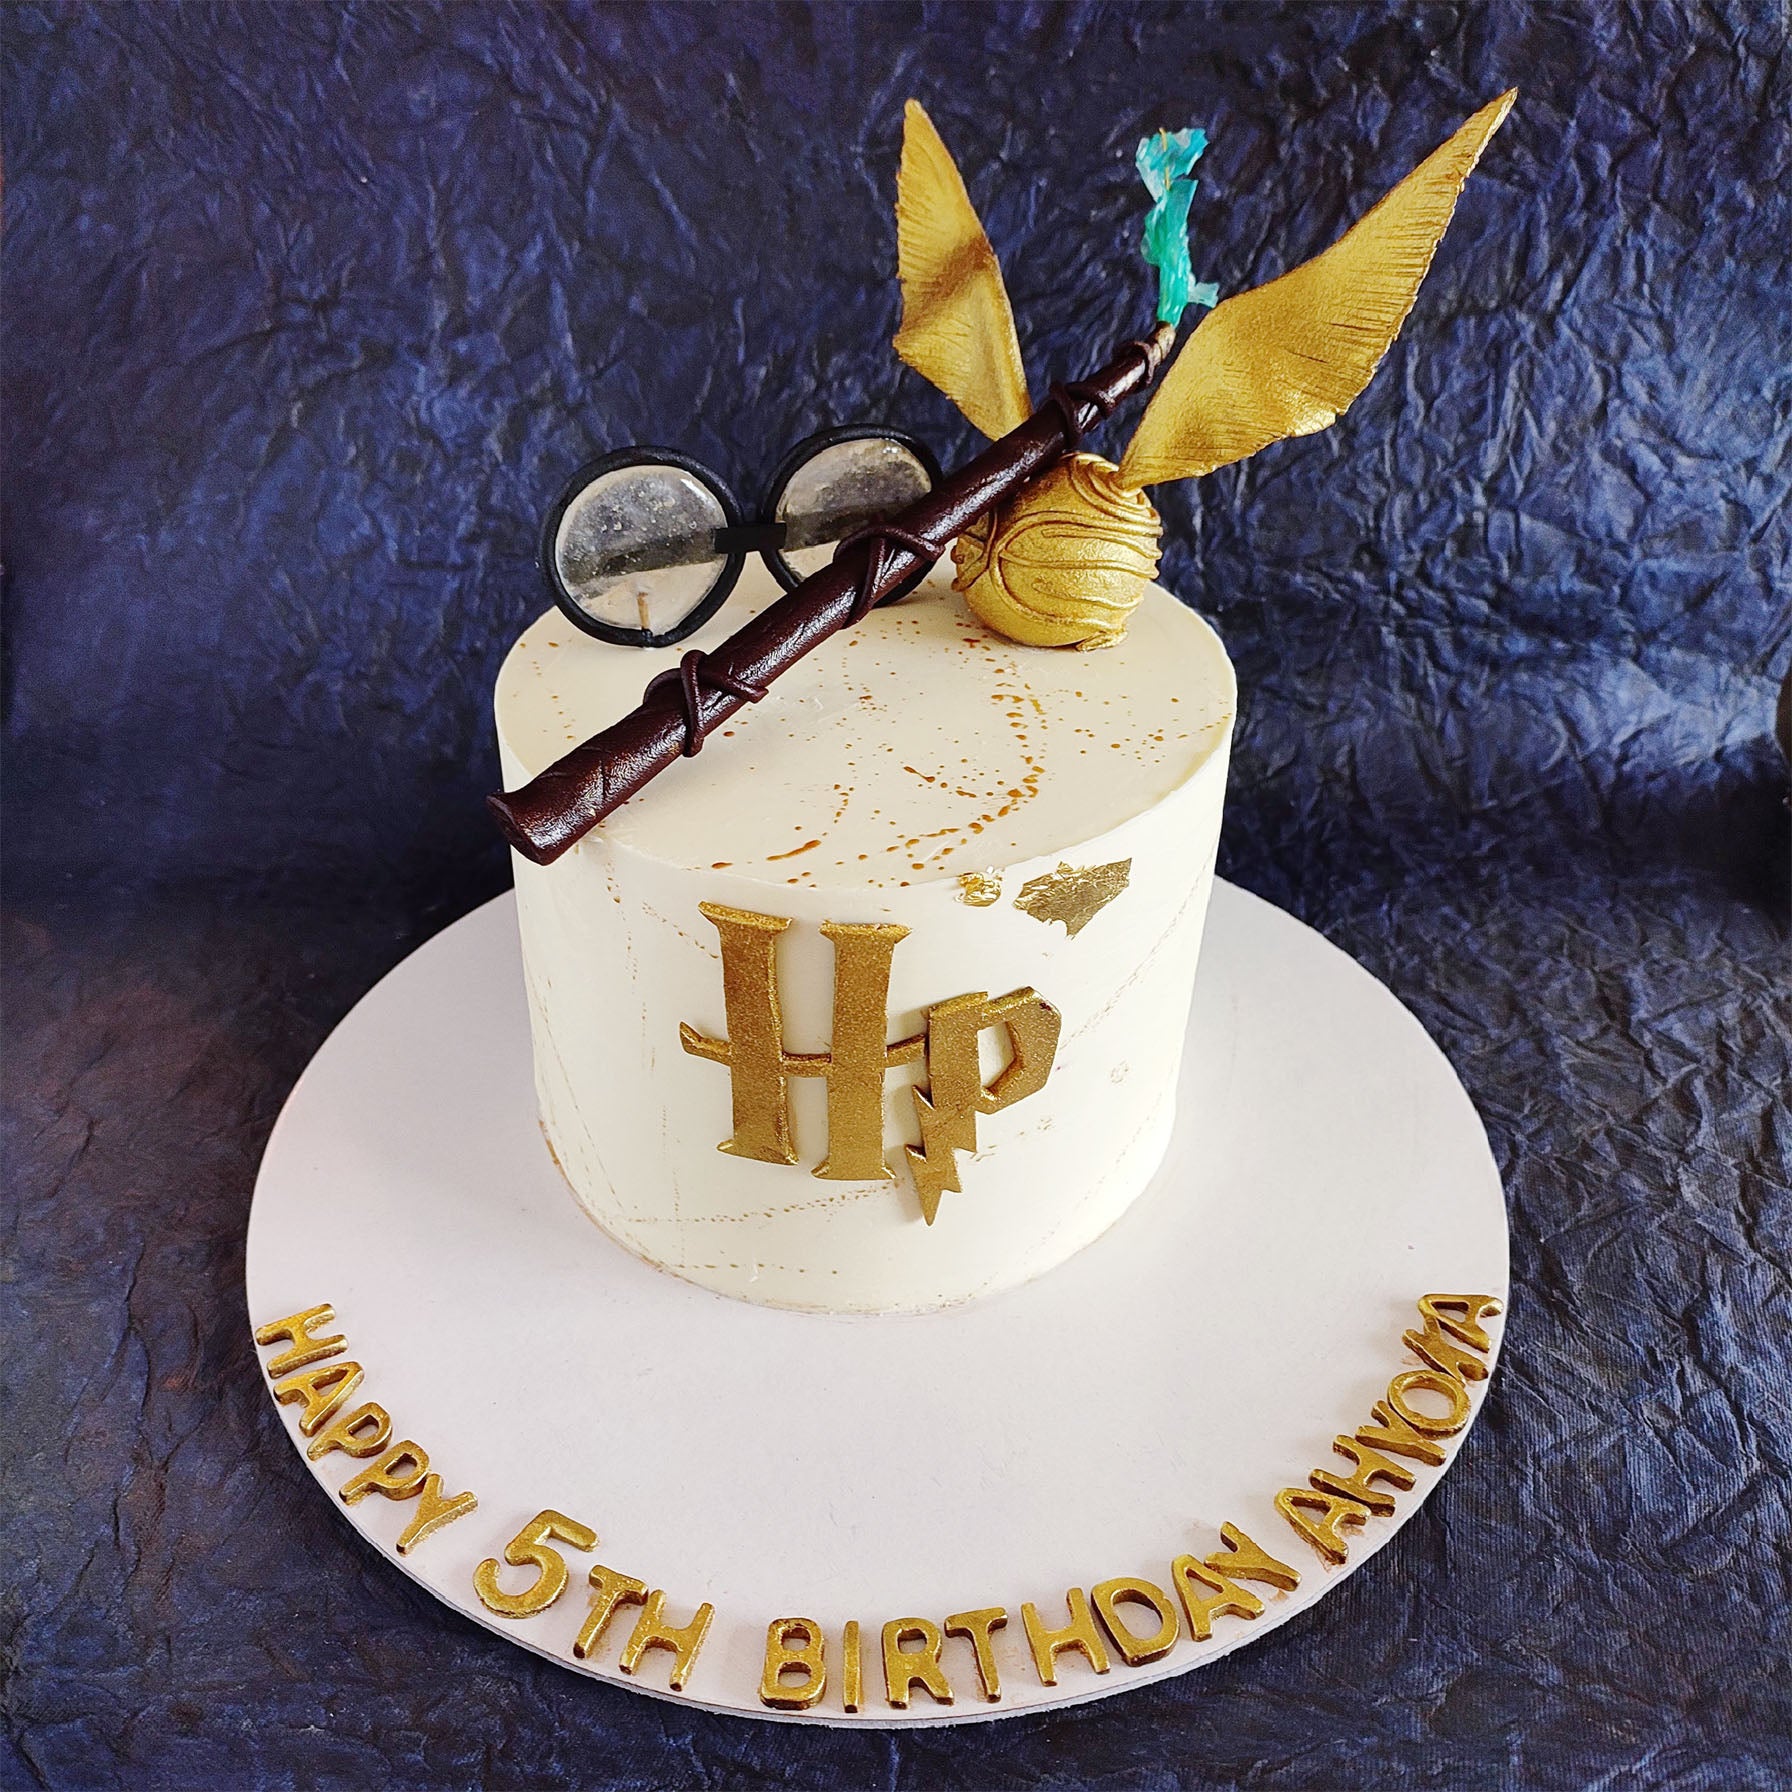 Harry Potter Cookie Cake - Hayley Cakes and Cookies Hayley Cakes and Cookies